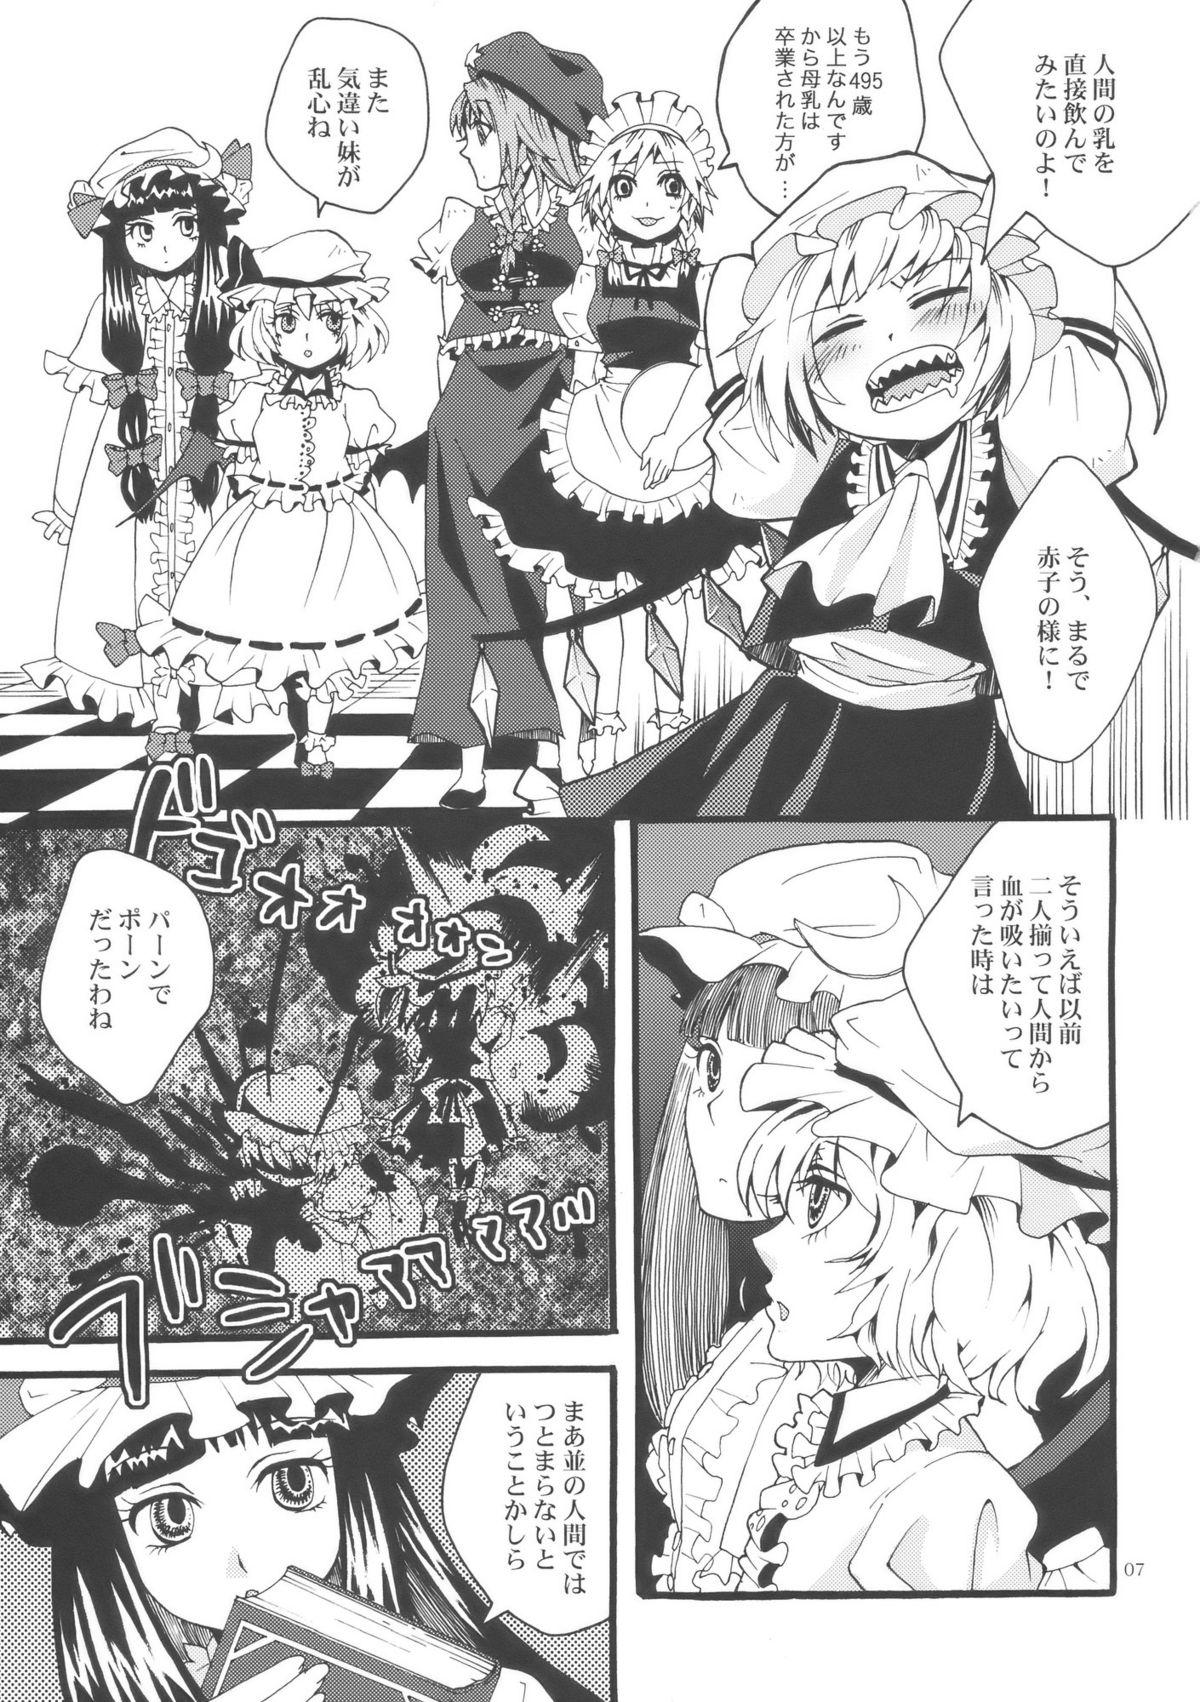 Puto Bloody White - Touhou project Stripping - Page 7